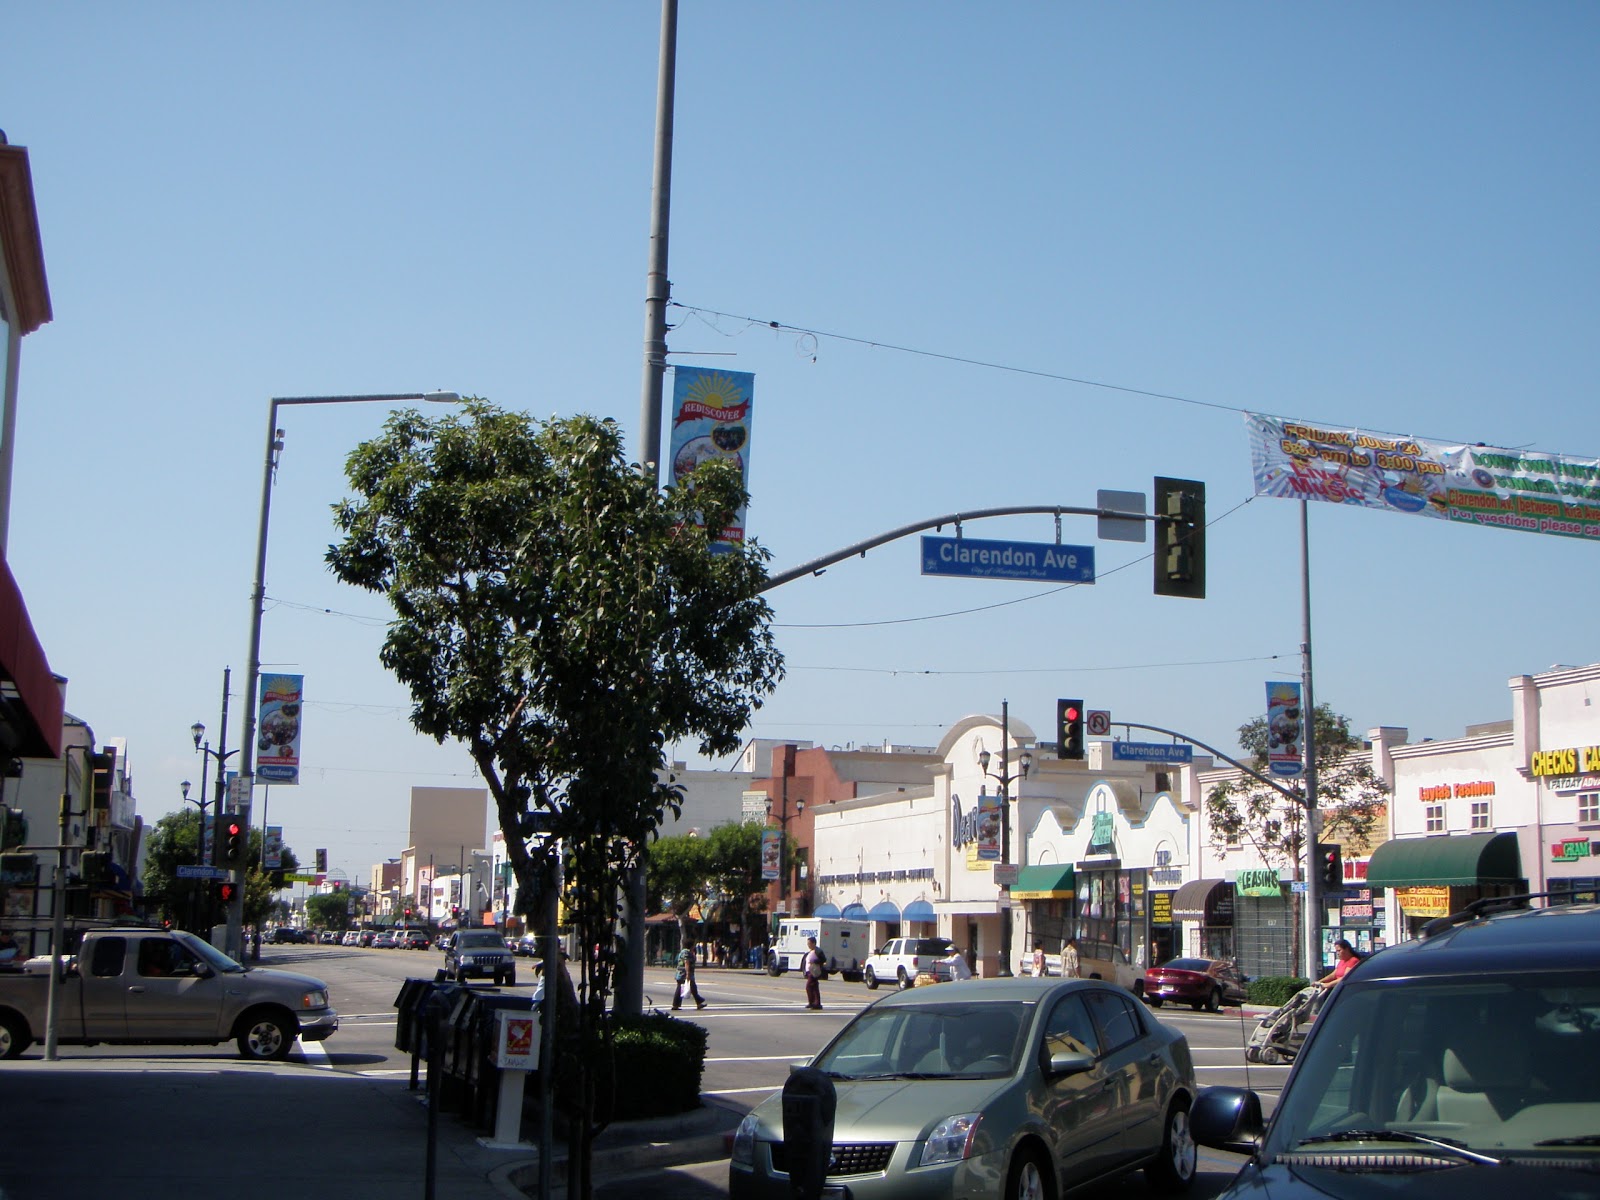 Places to Visit in Huntington Park